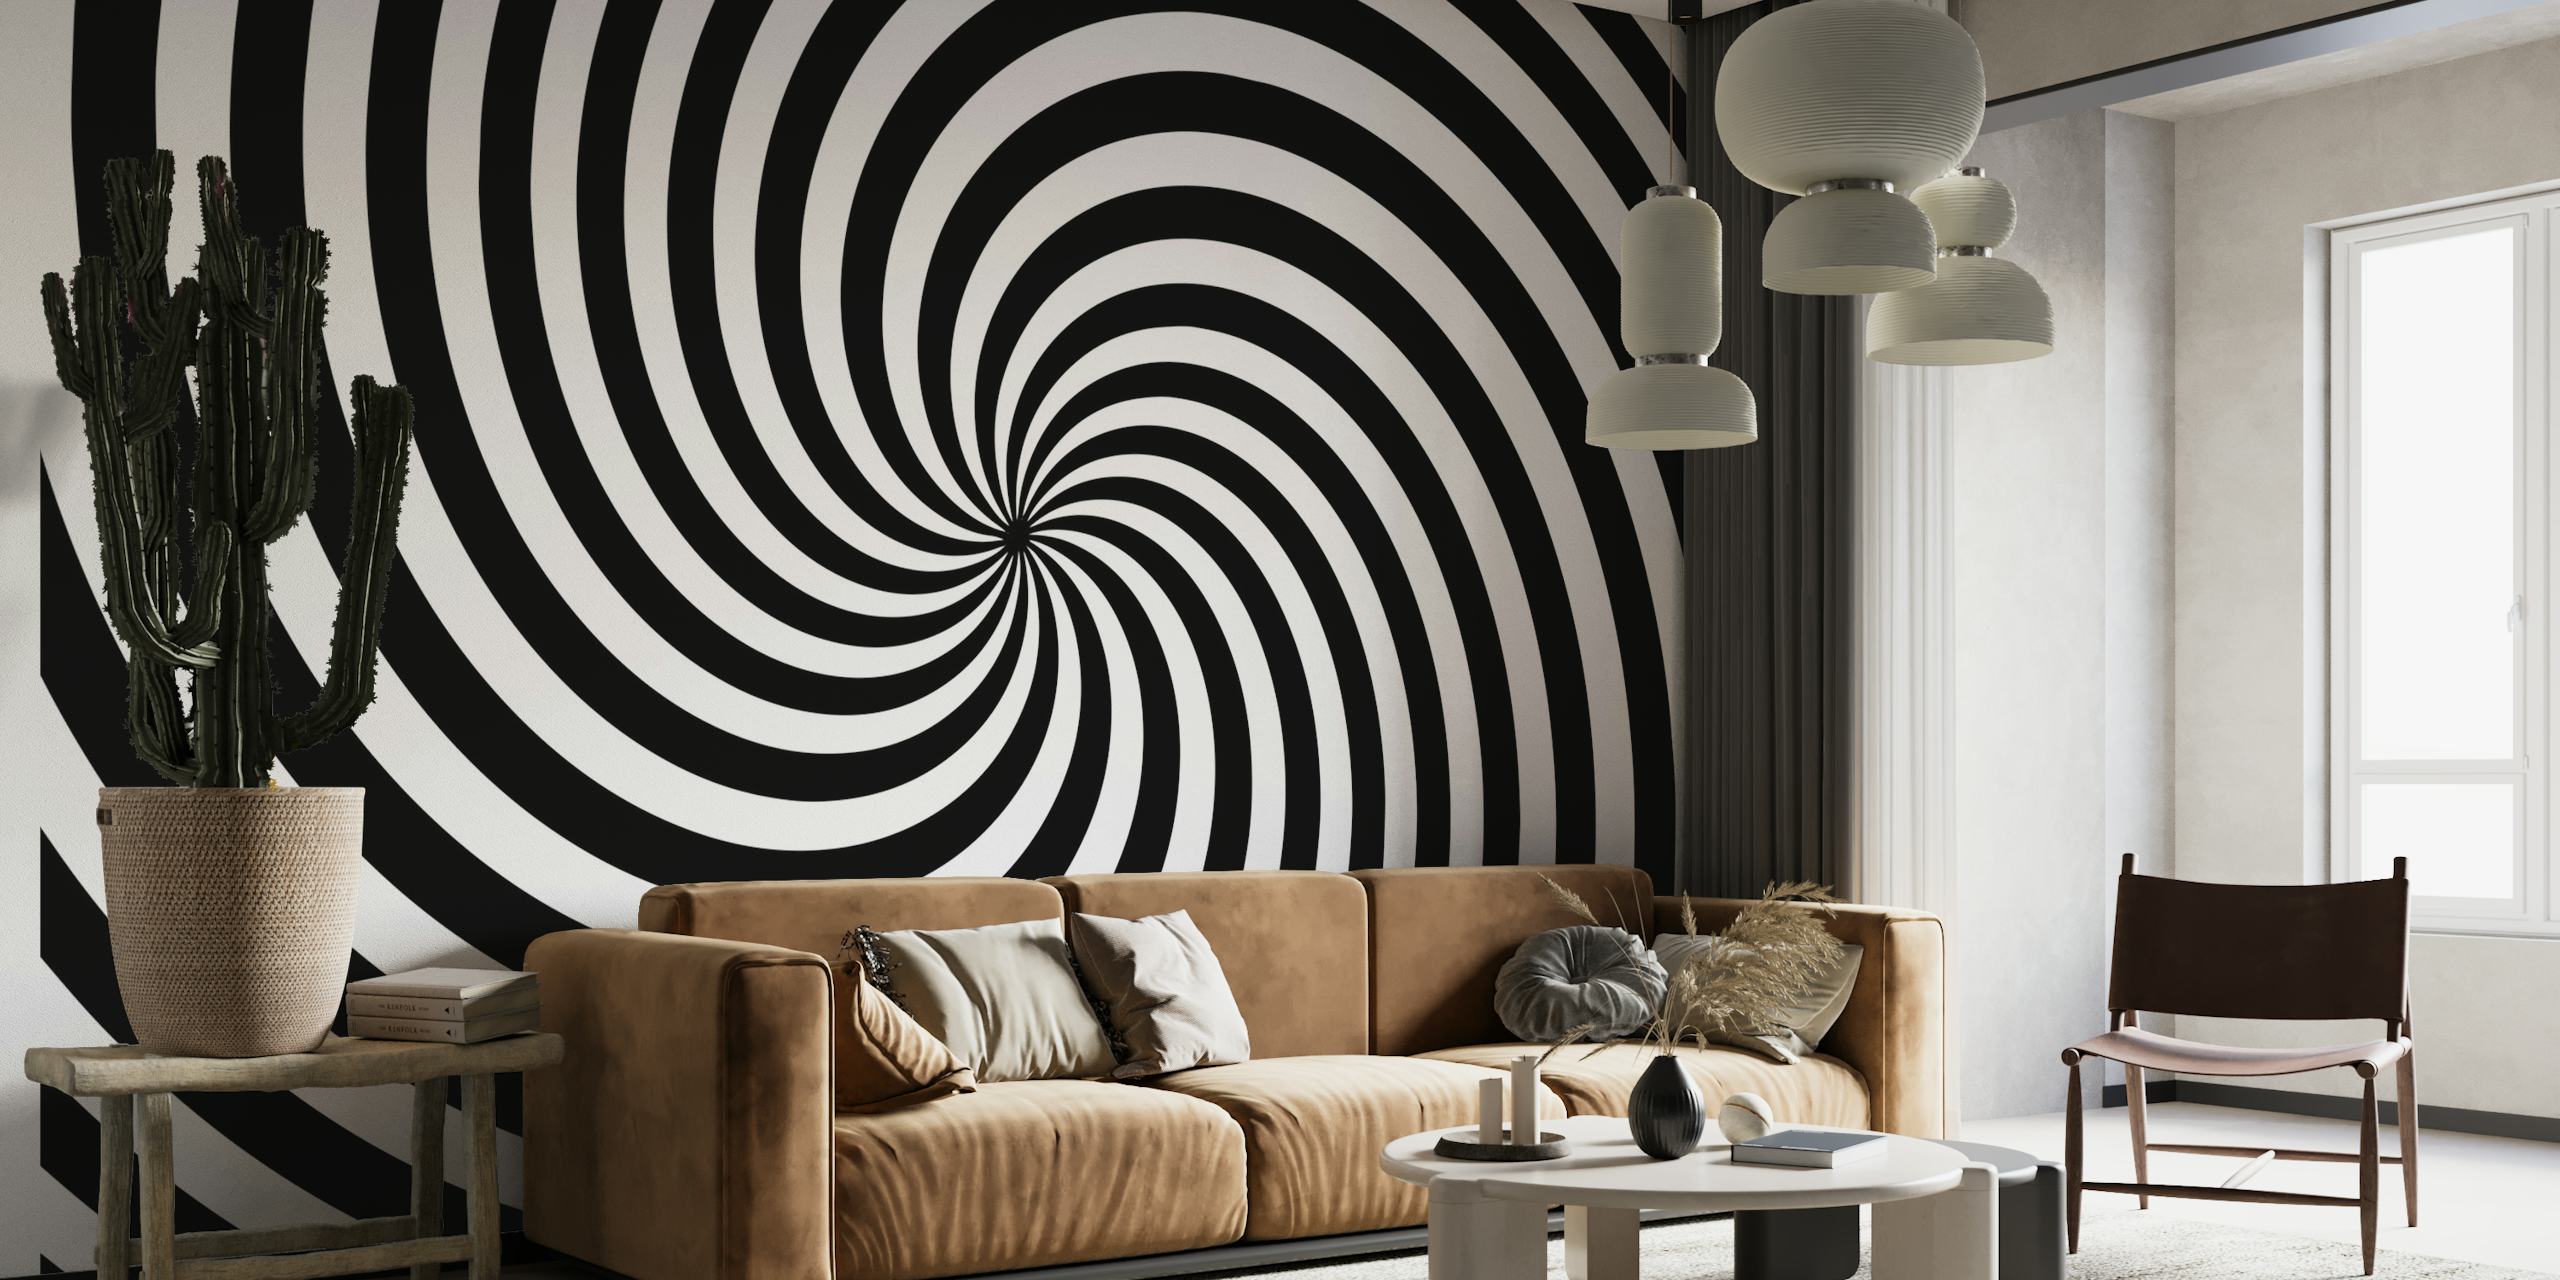 Black and white Spiral Illusion Wallpaper and Wall Mural with a striking op-art design